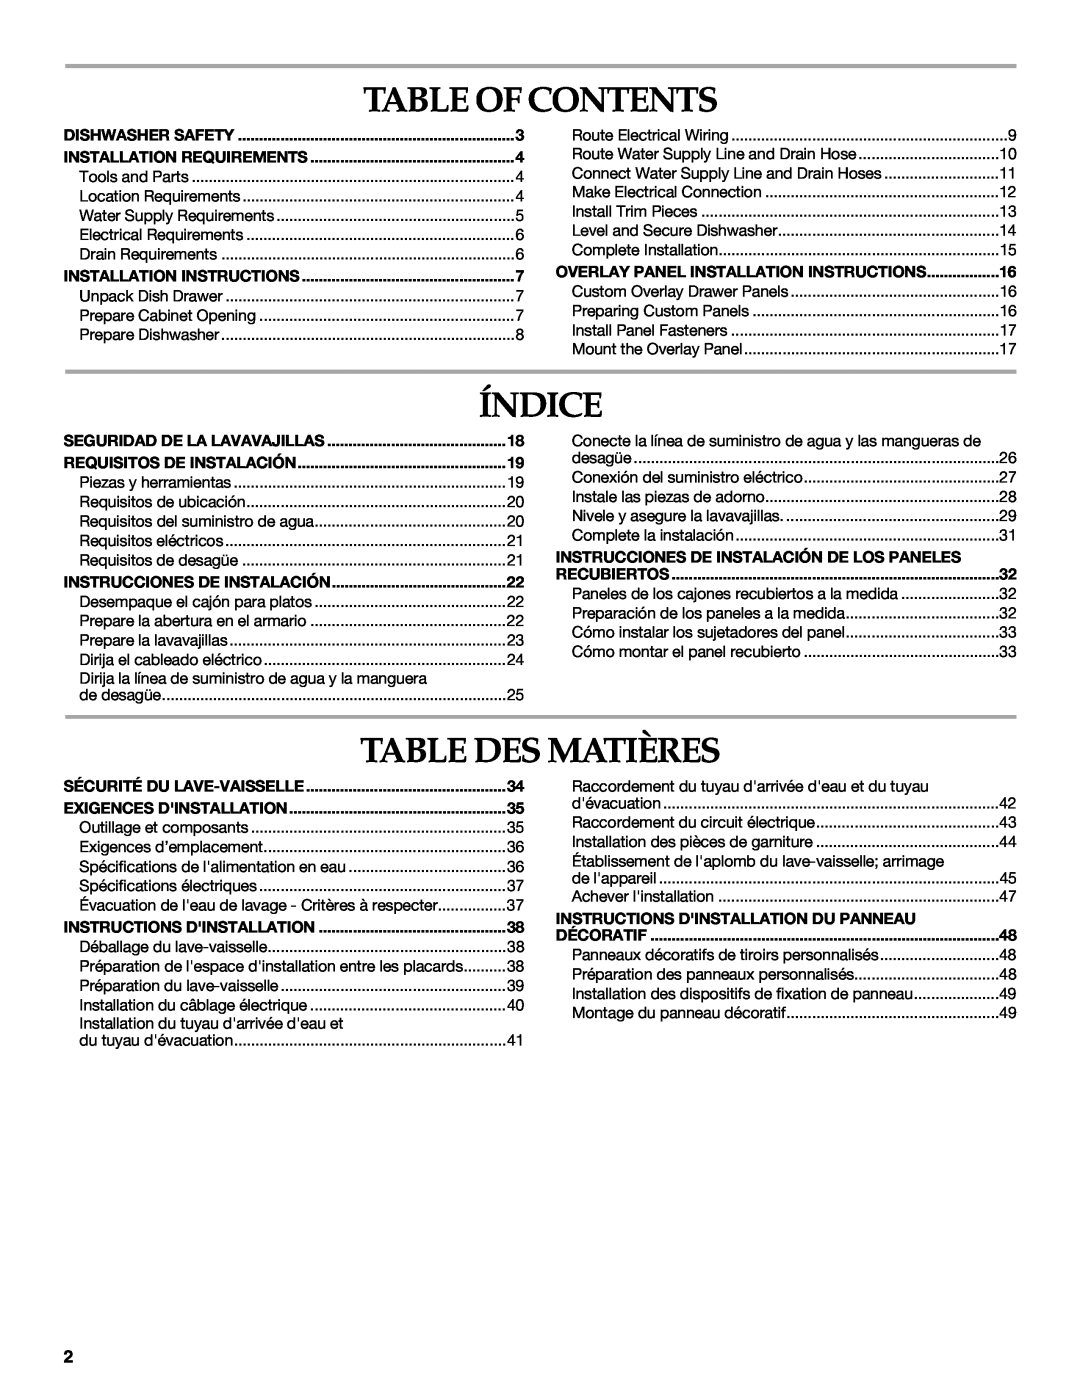 KitchenAid W10118037B Table Of Contents, Índice, Table Des Matières, Dishwasher Safety, Installation Requirements 